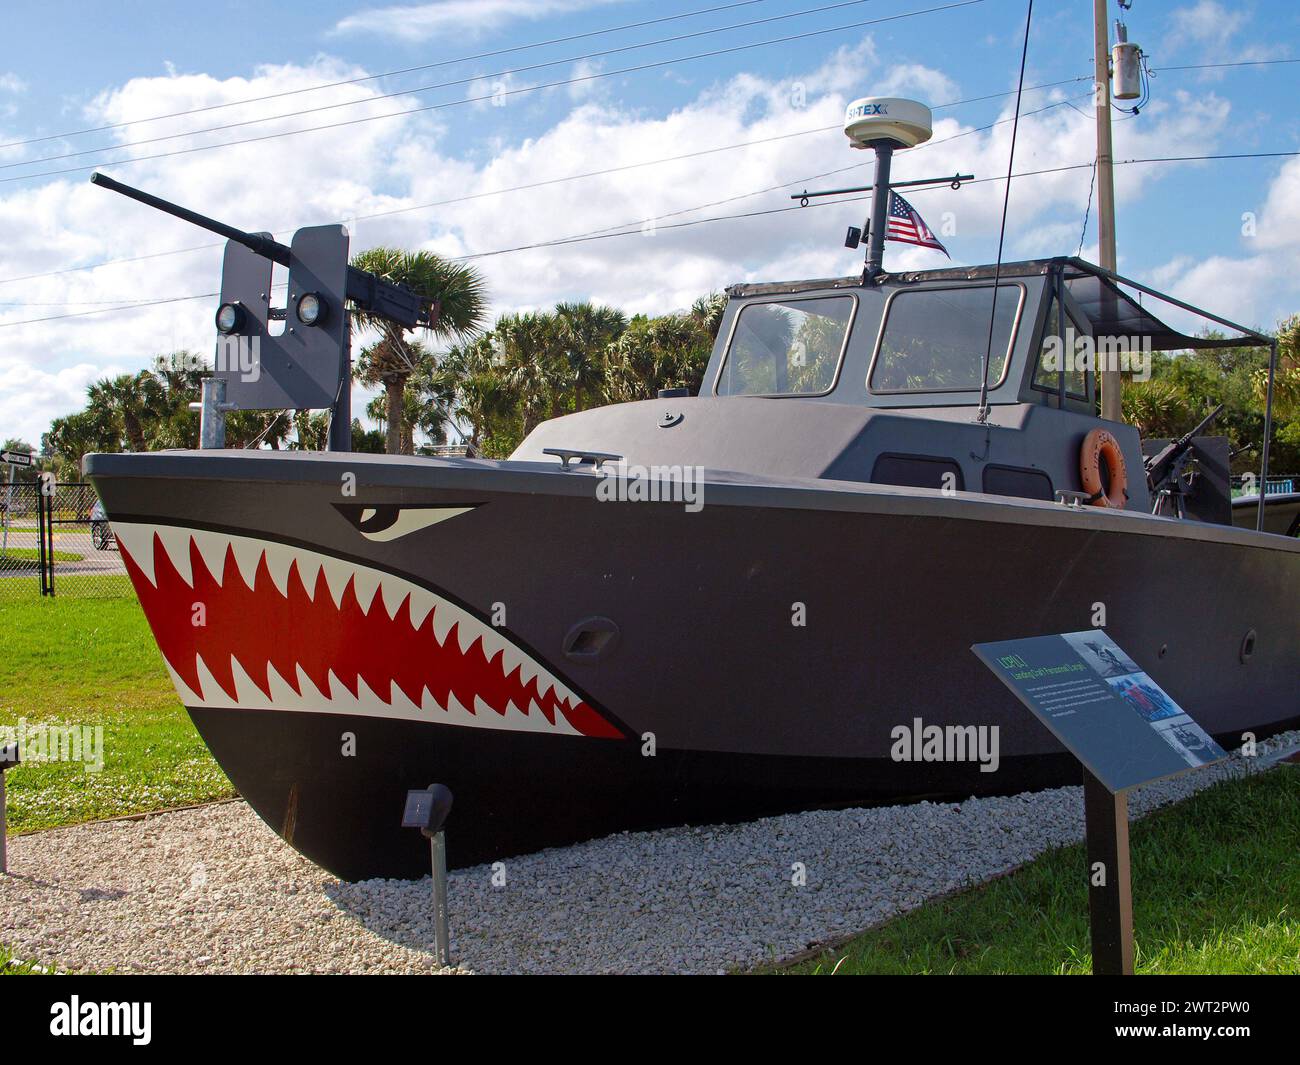 Ft. Pierce, Florida, United States - December 29, 2015: River patrol boat in the Navy Seal Museum near the city of Fort Pierce. Stock Photo